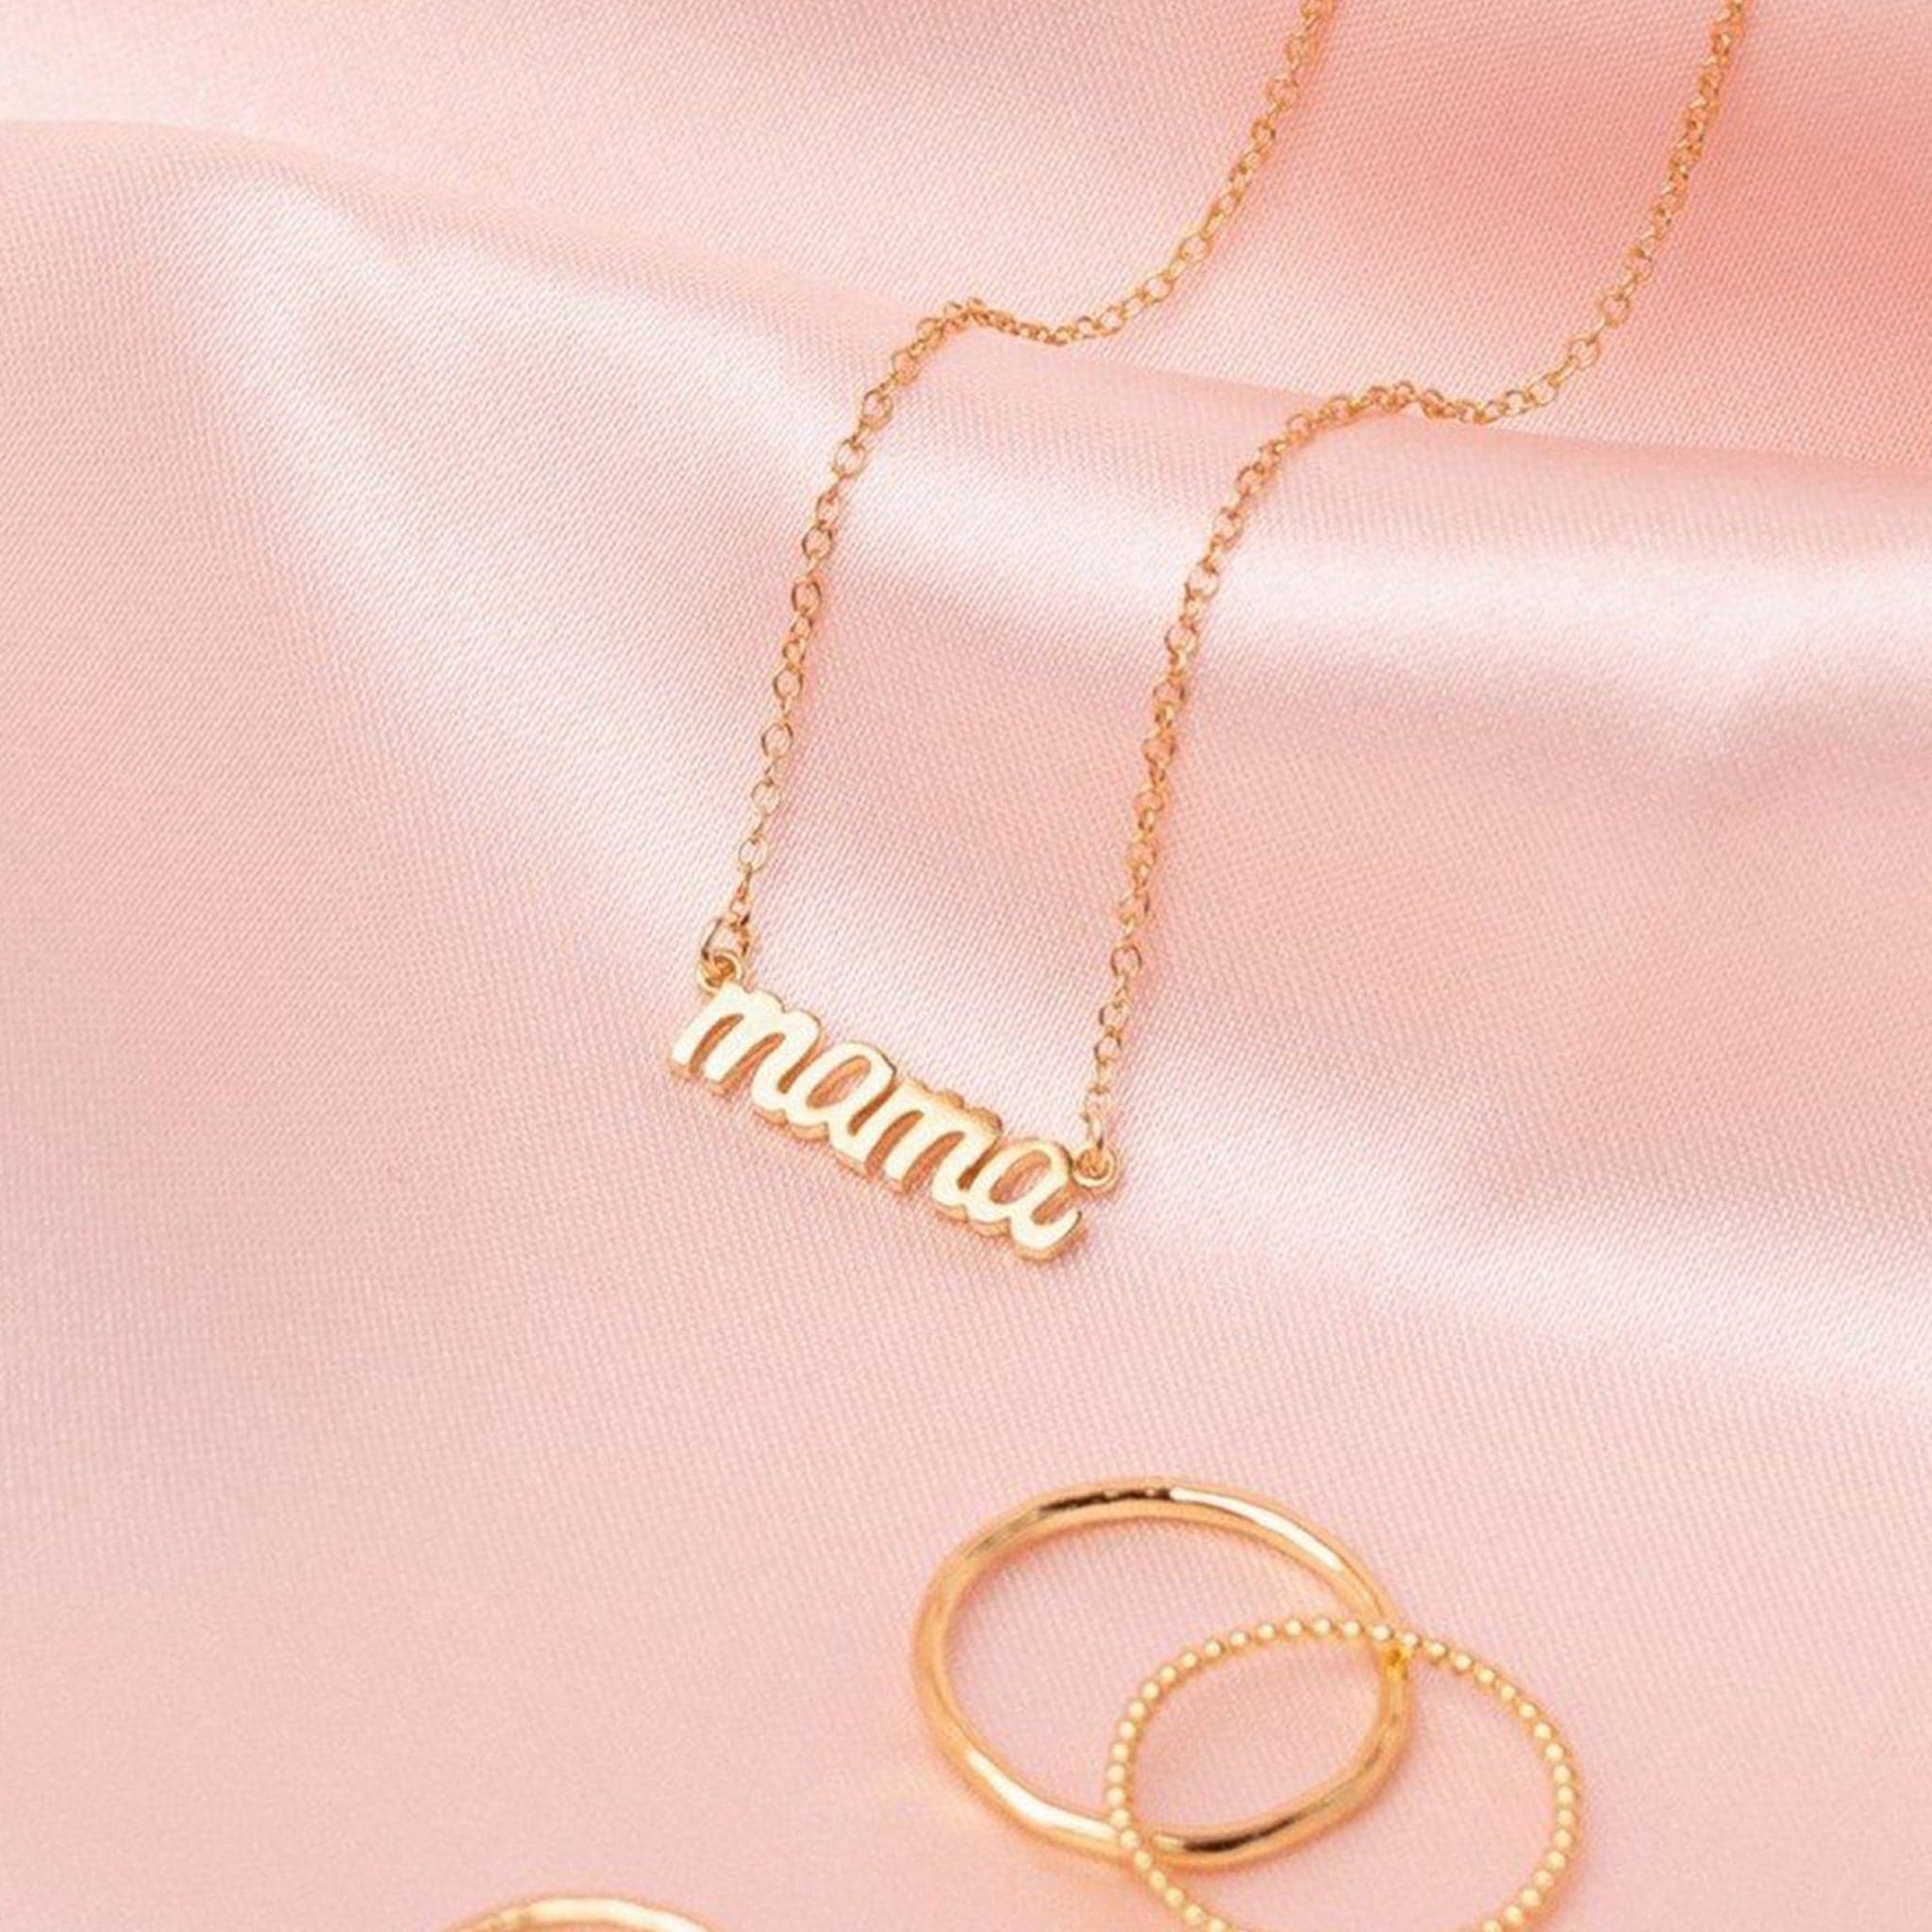 A dainty chain necklace with a small "mama" charm.